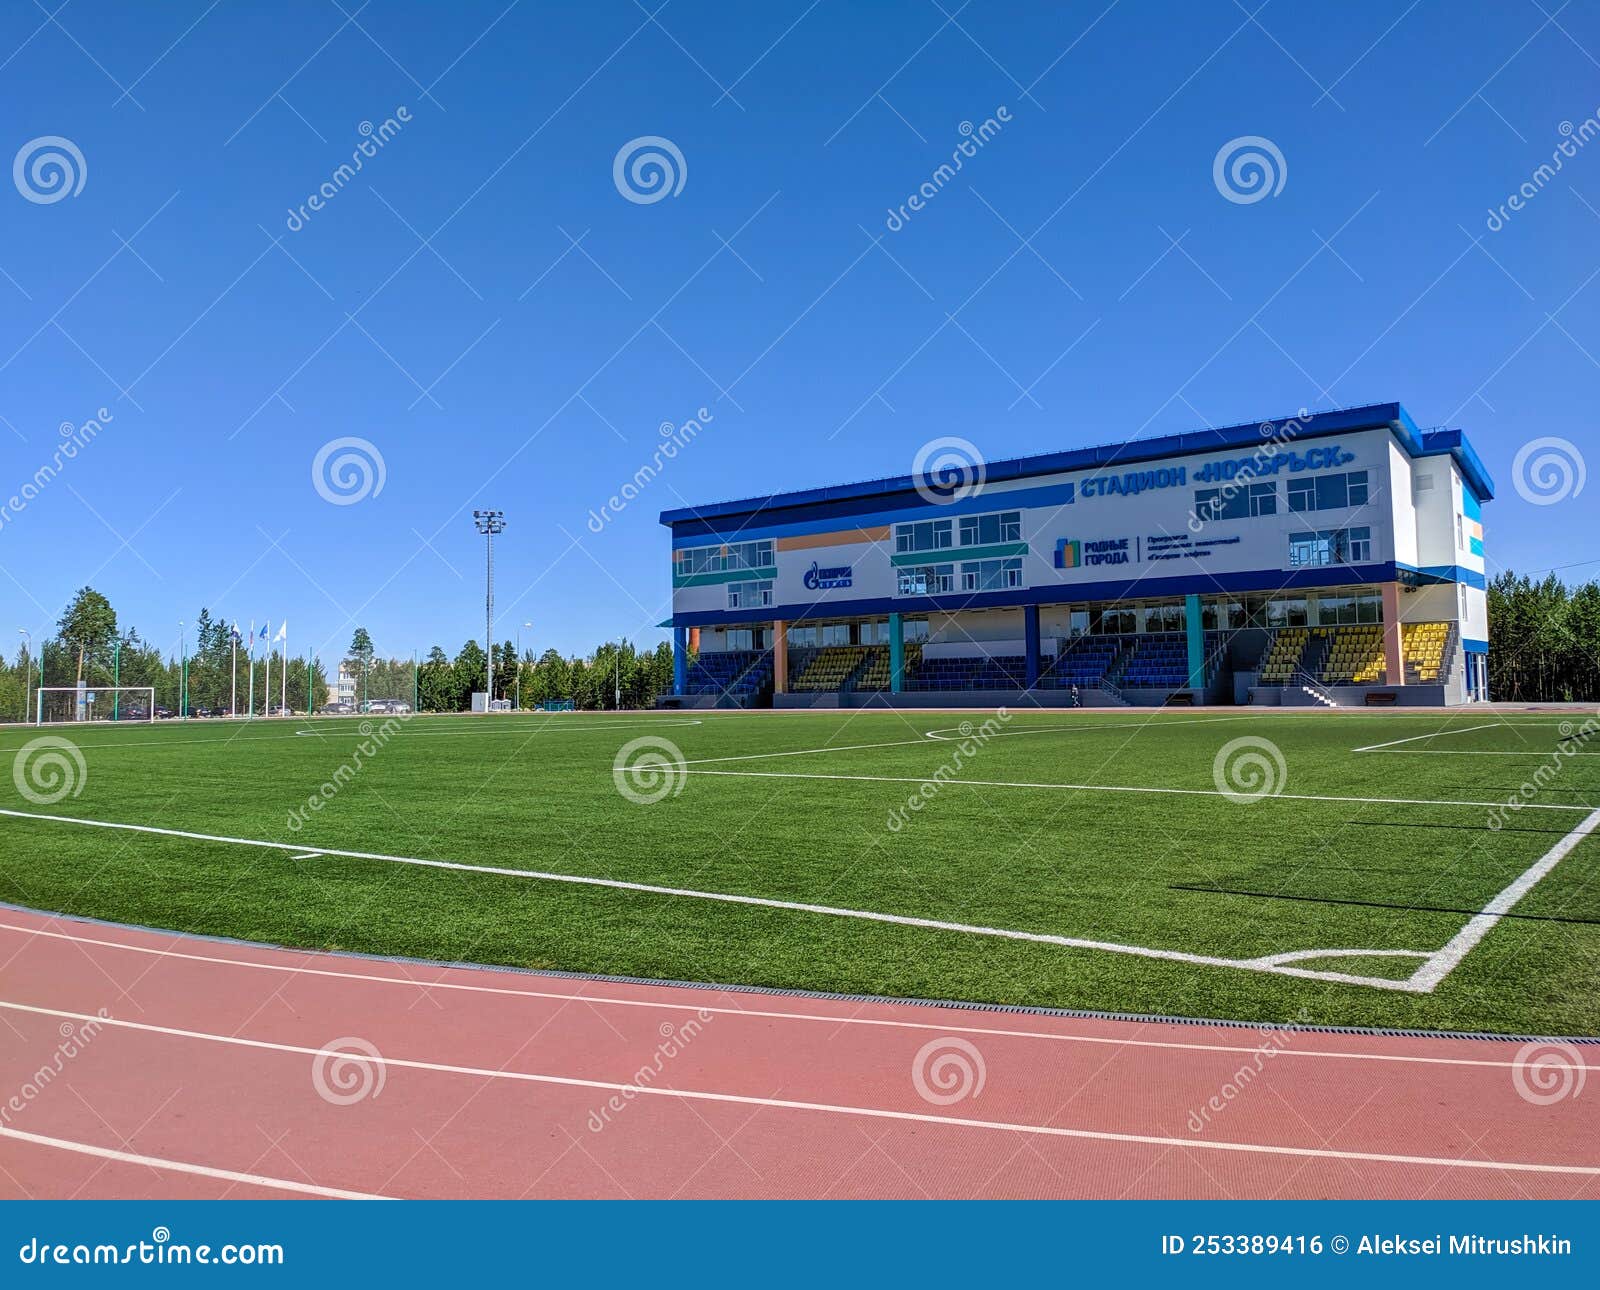 Noyabrsk, Russia - July 13 2022: View of the Noyabrsk Sports Stadium